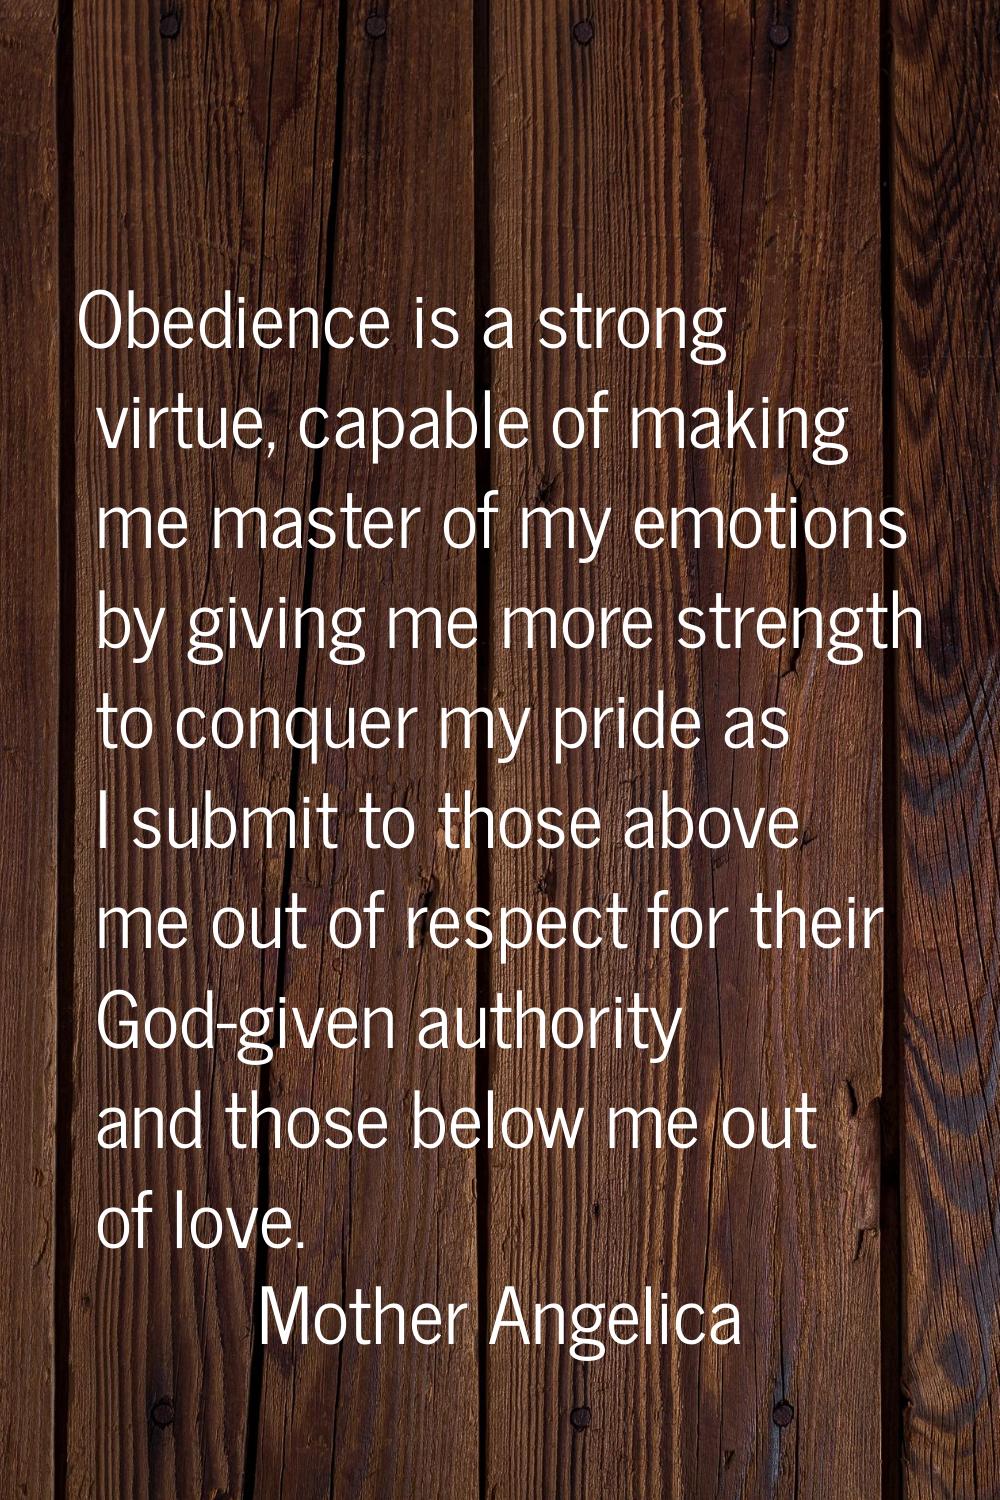 Obedience is a strong virtue, capable of making me master of my emotions by giving me more strength